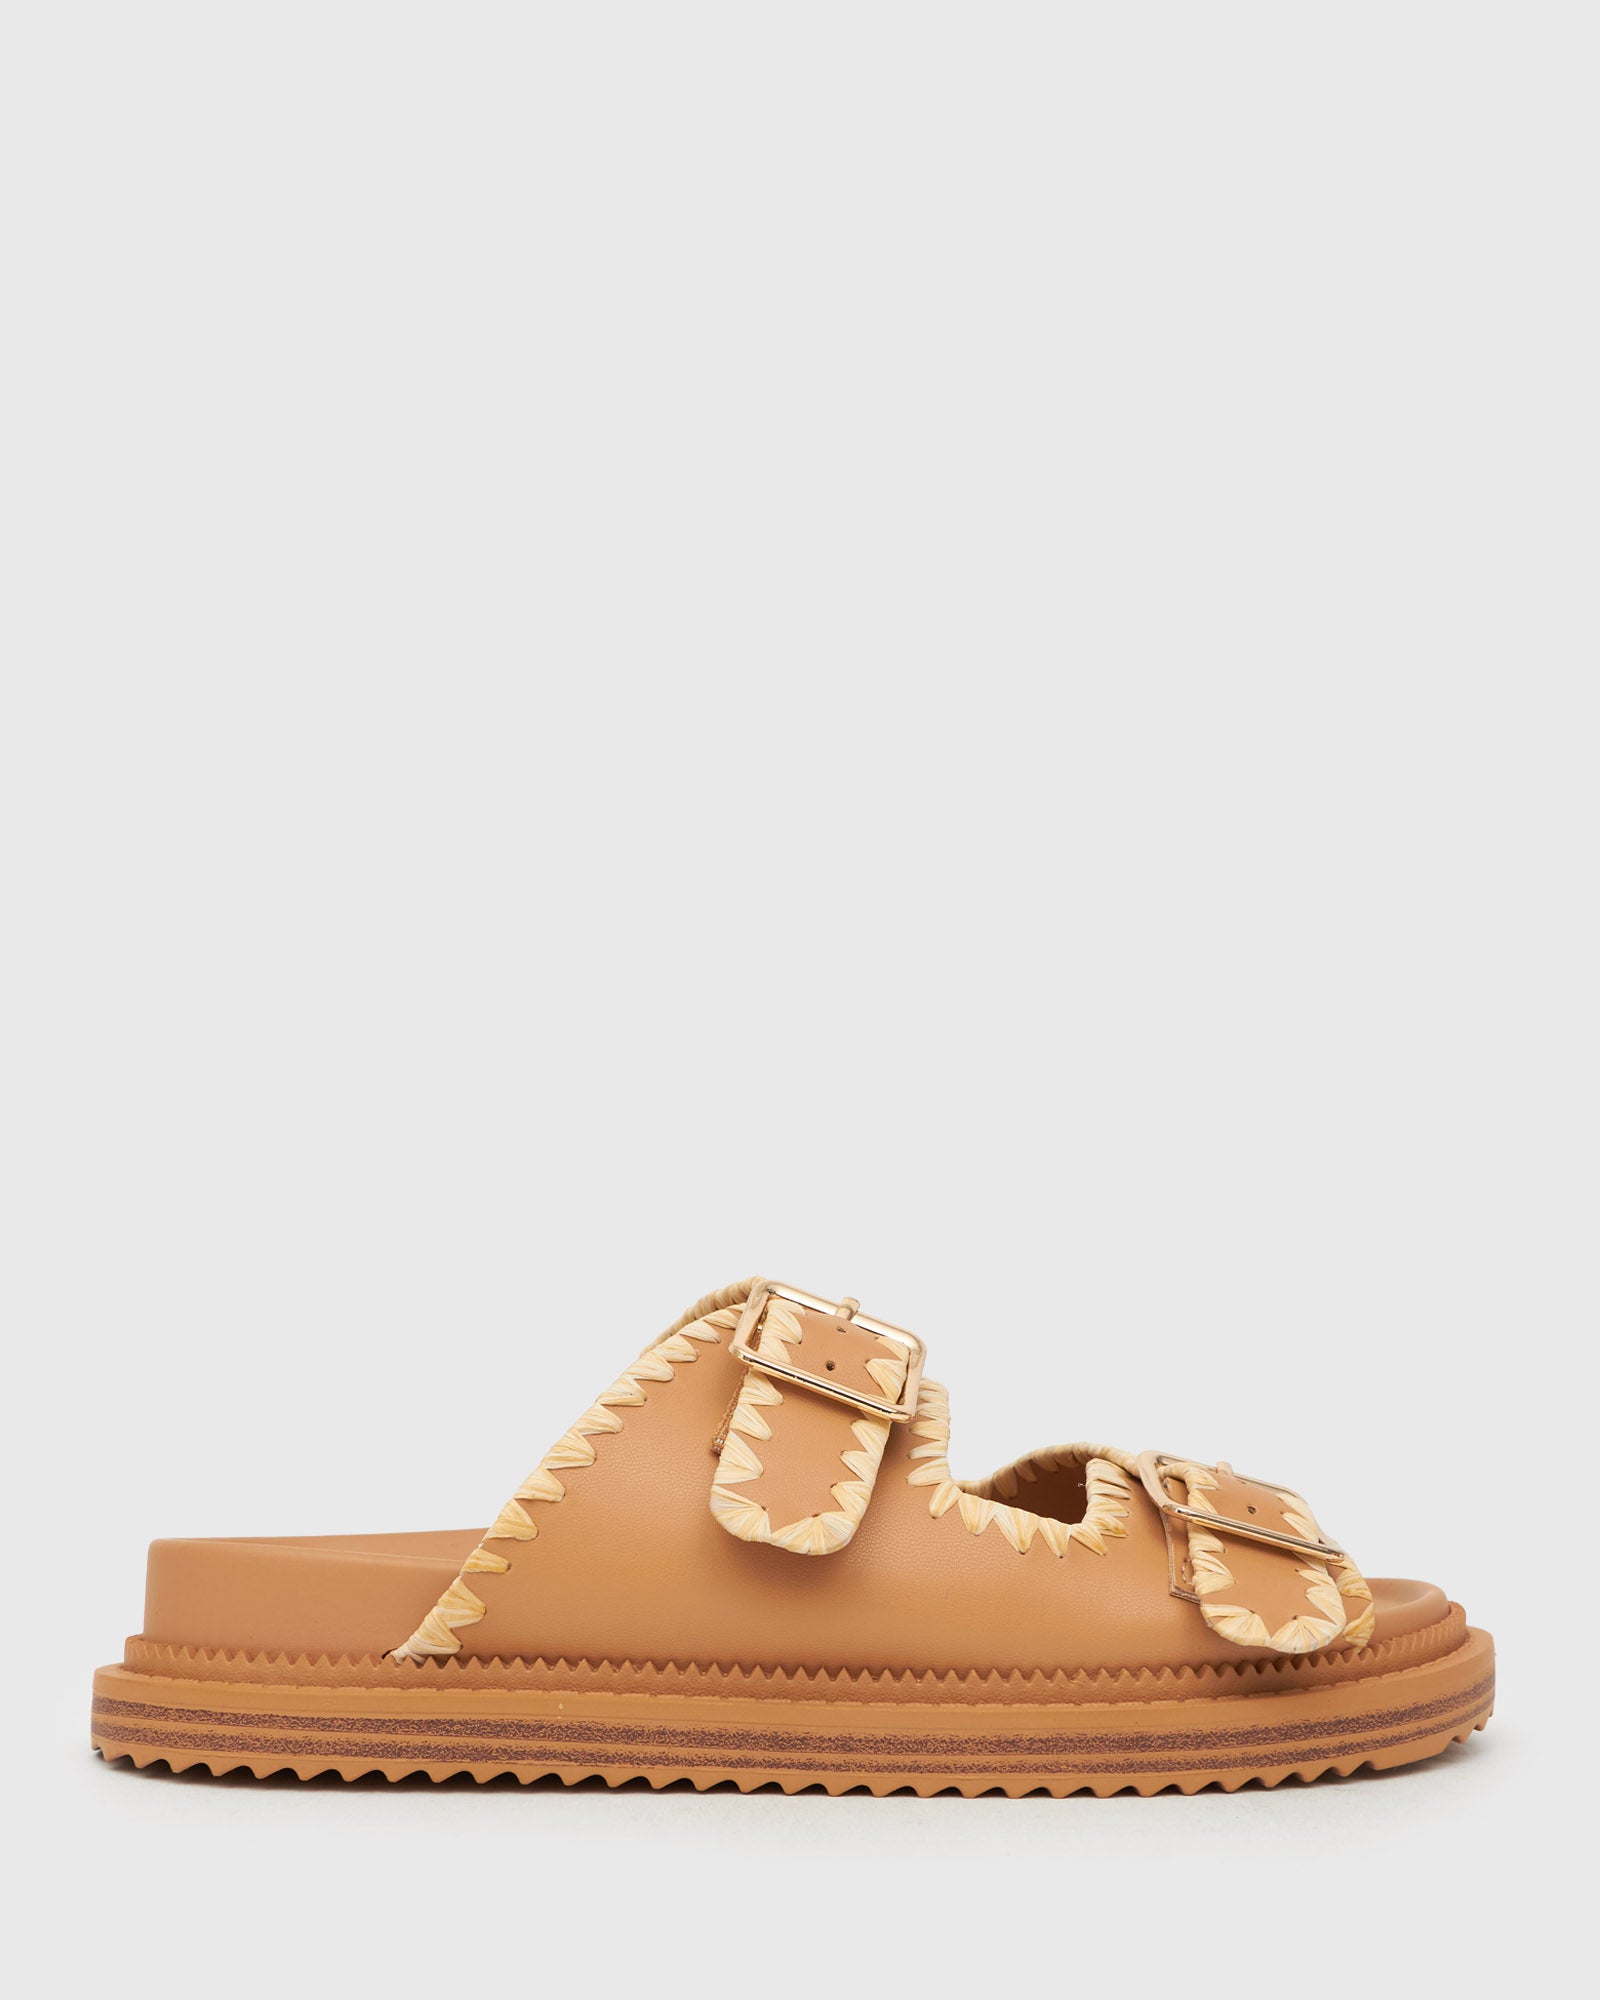 Buy MANHATTAN Double Buckle Sandals by Betts online - Betts